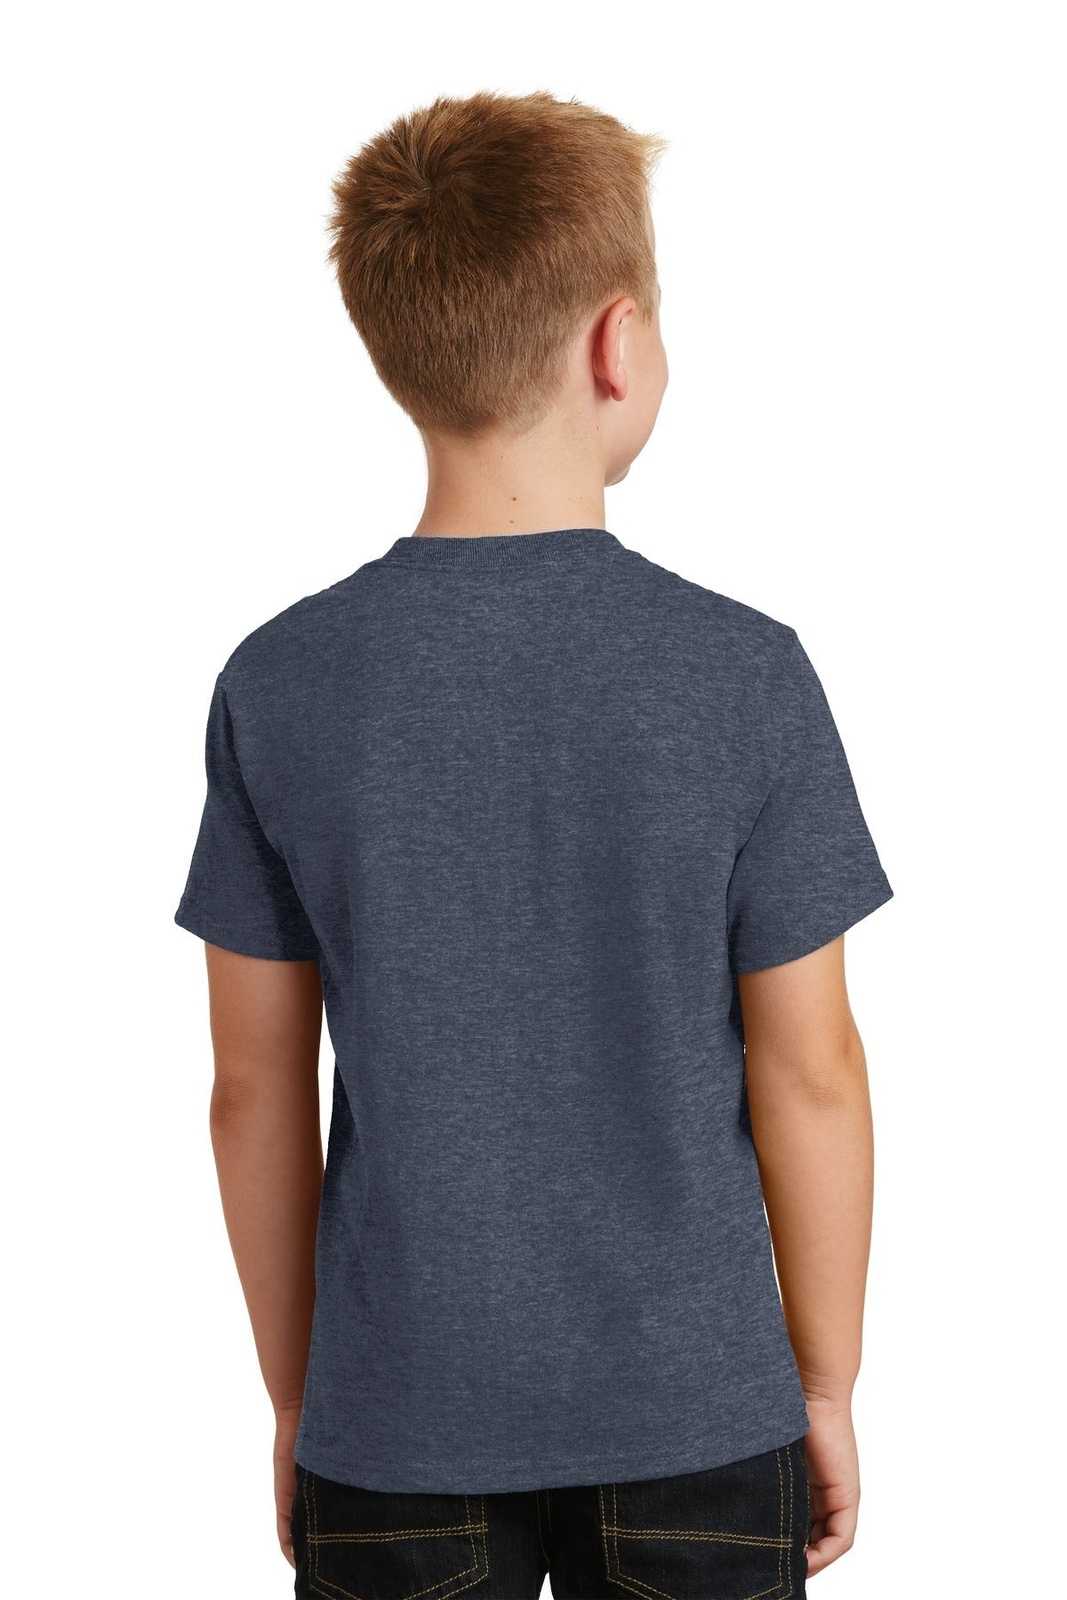 Port &amp; Company PC54Y Youth Core Cotton Tee - Heather Navy - HIT a Double - 2